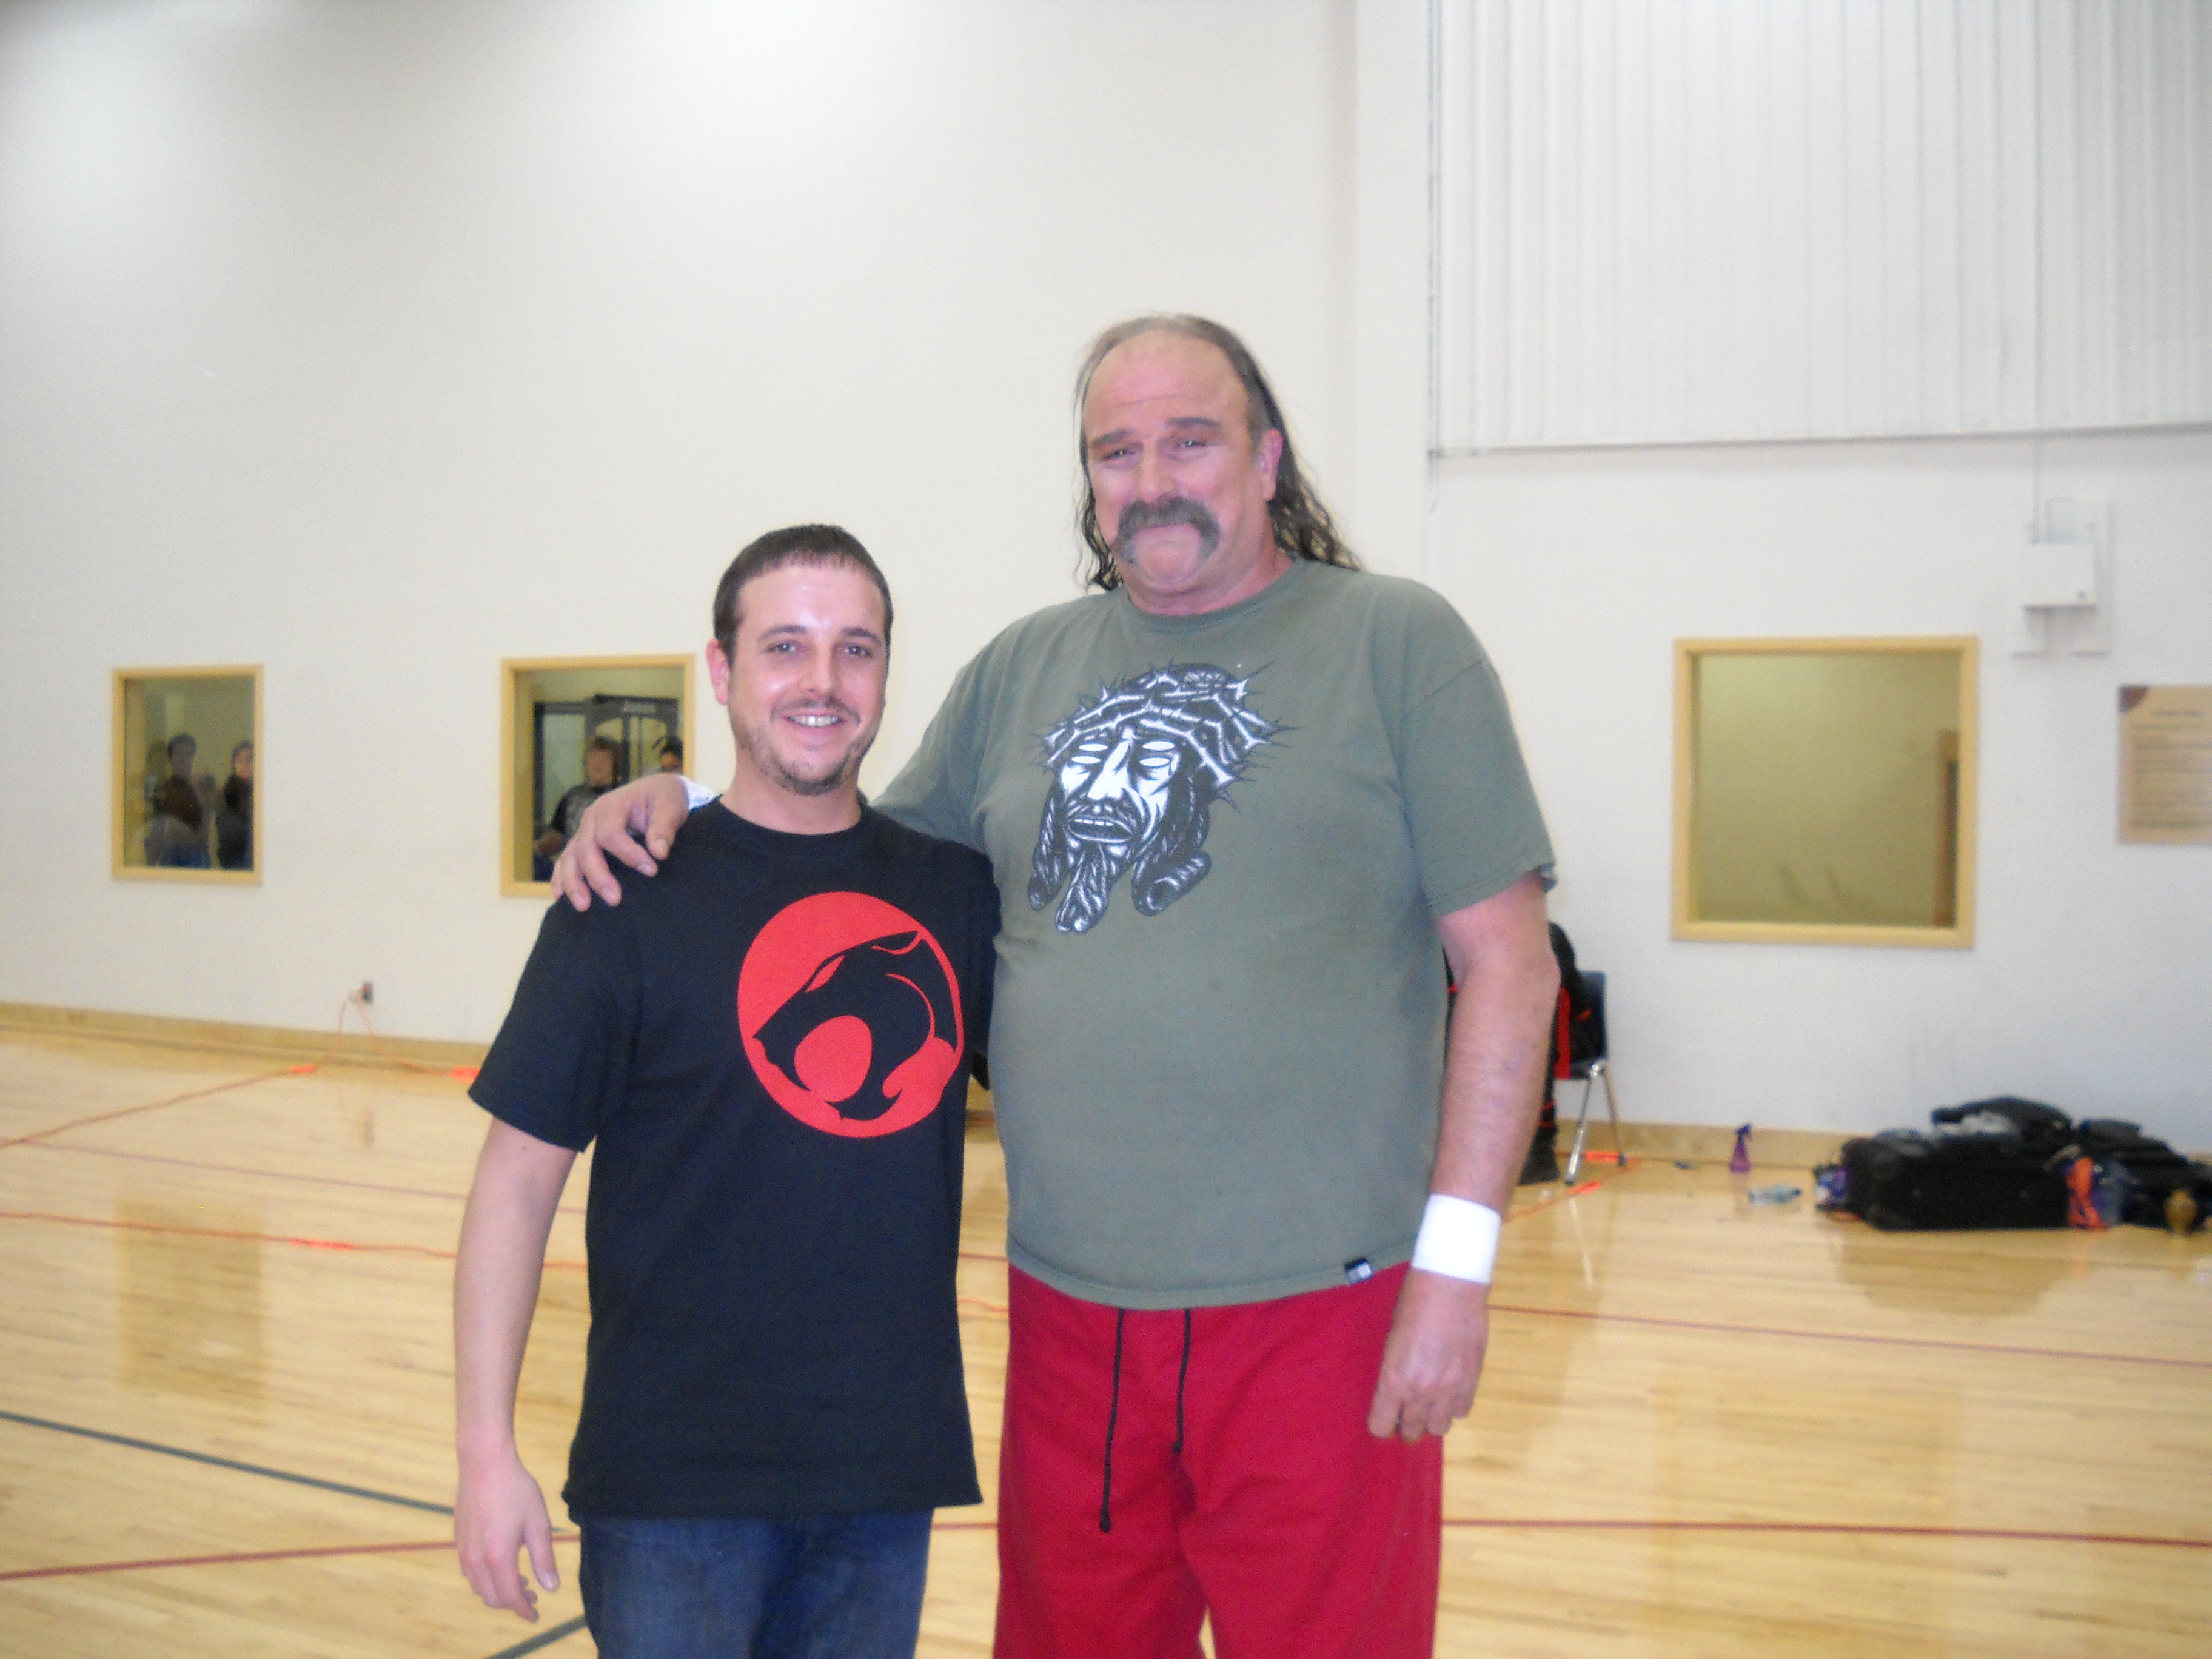 BTS with Legendary WWE Superstar Aurelian Smith aka Jake 'The Snake'Roberts and Actor&Producer Nicholas Joseph Mackey on set of the feature film 'Little Creeps